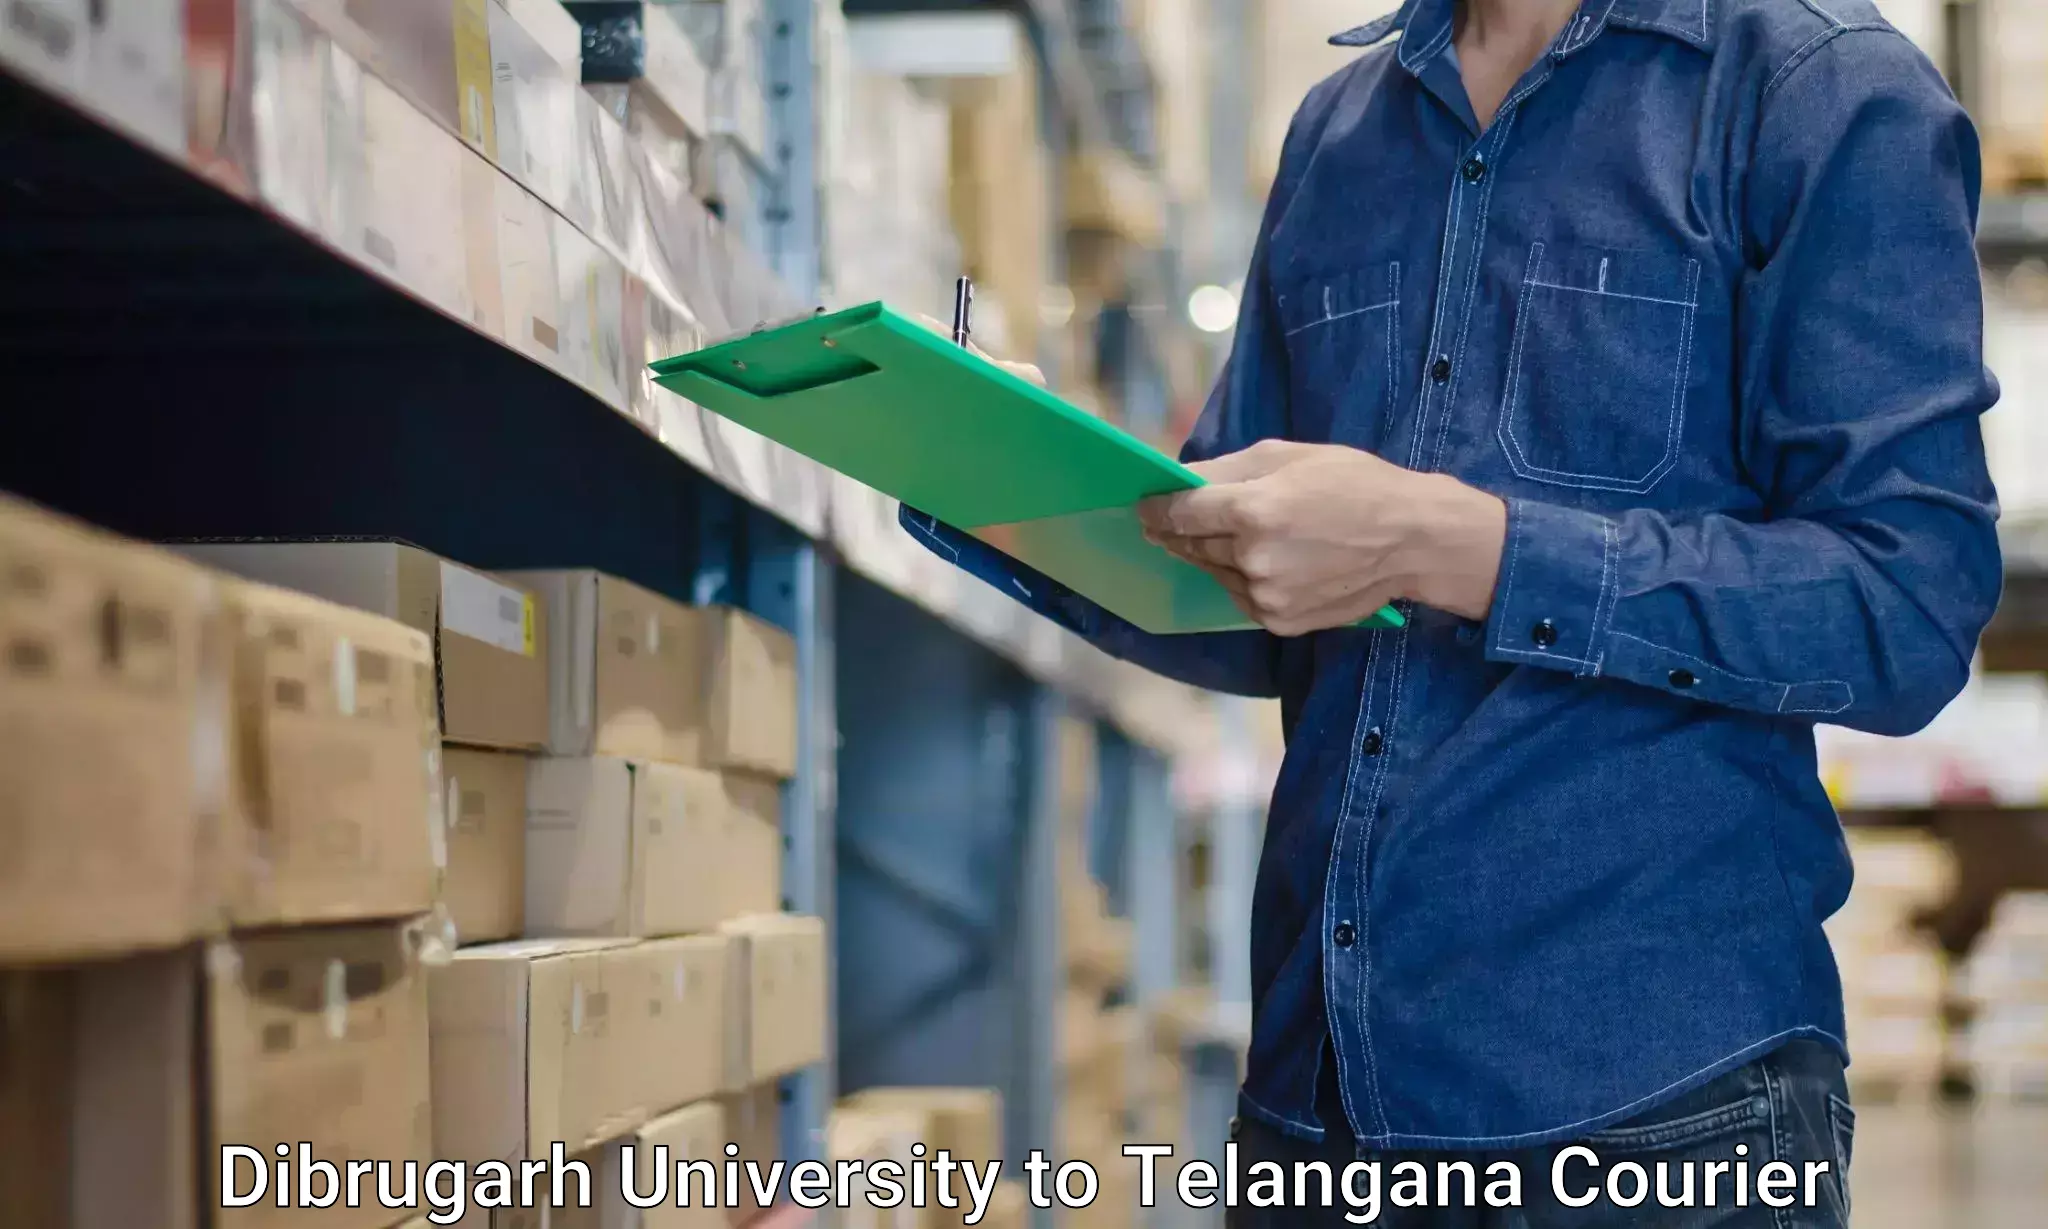 Quality relocation assistance Dibrugarh University to Chennur